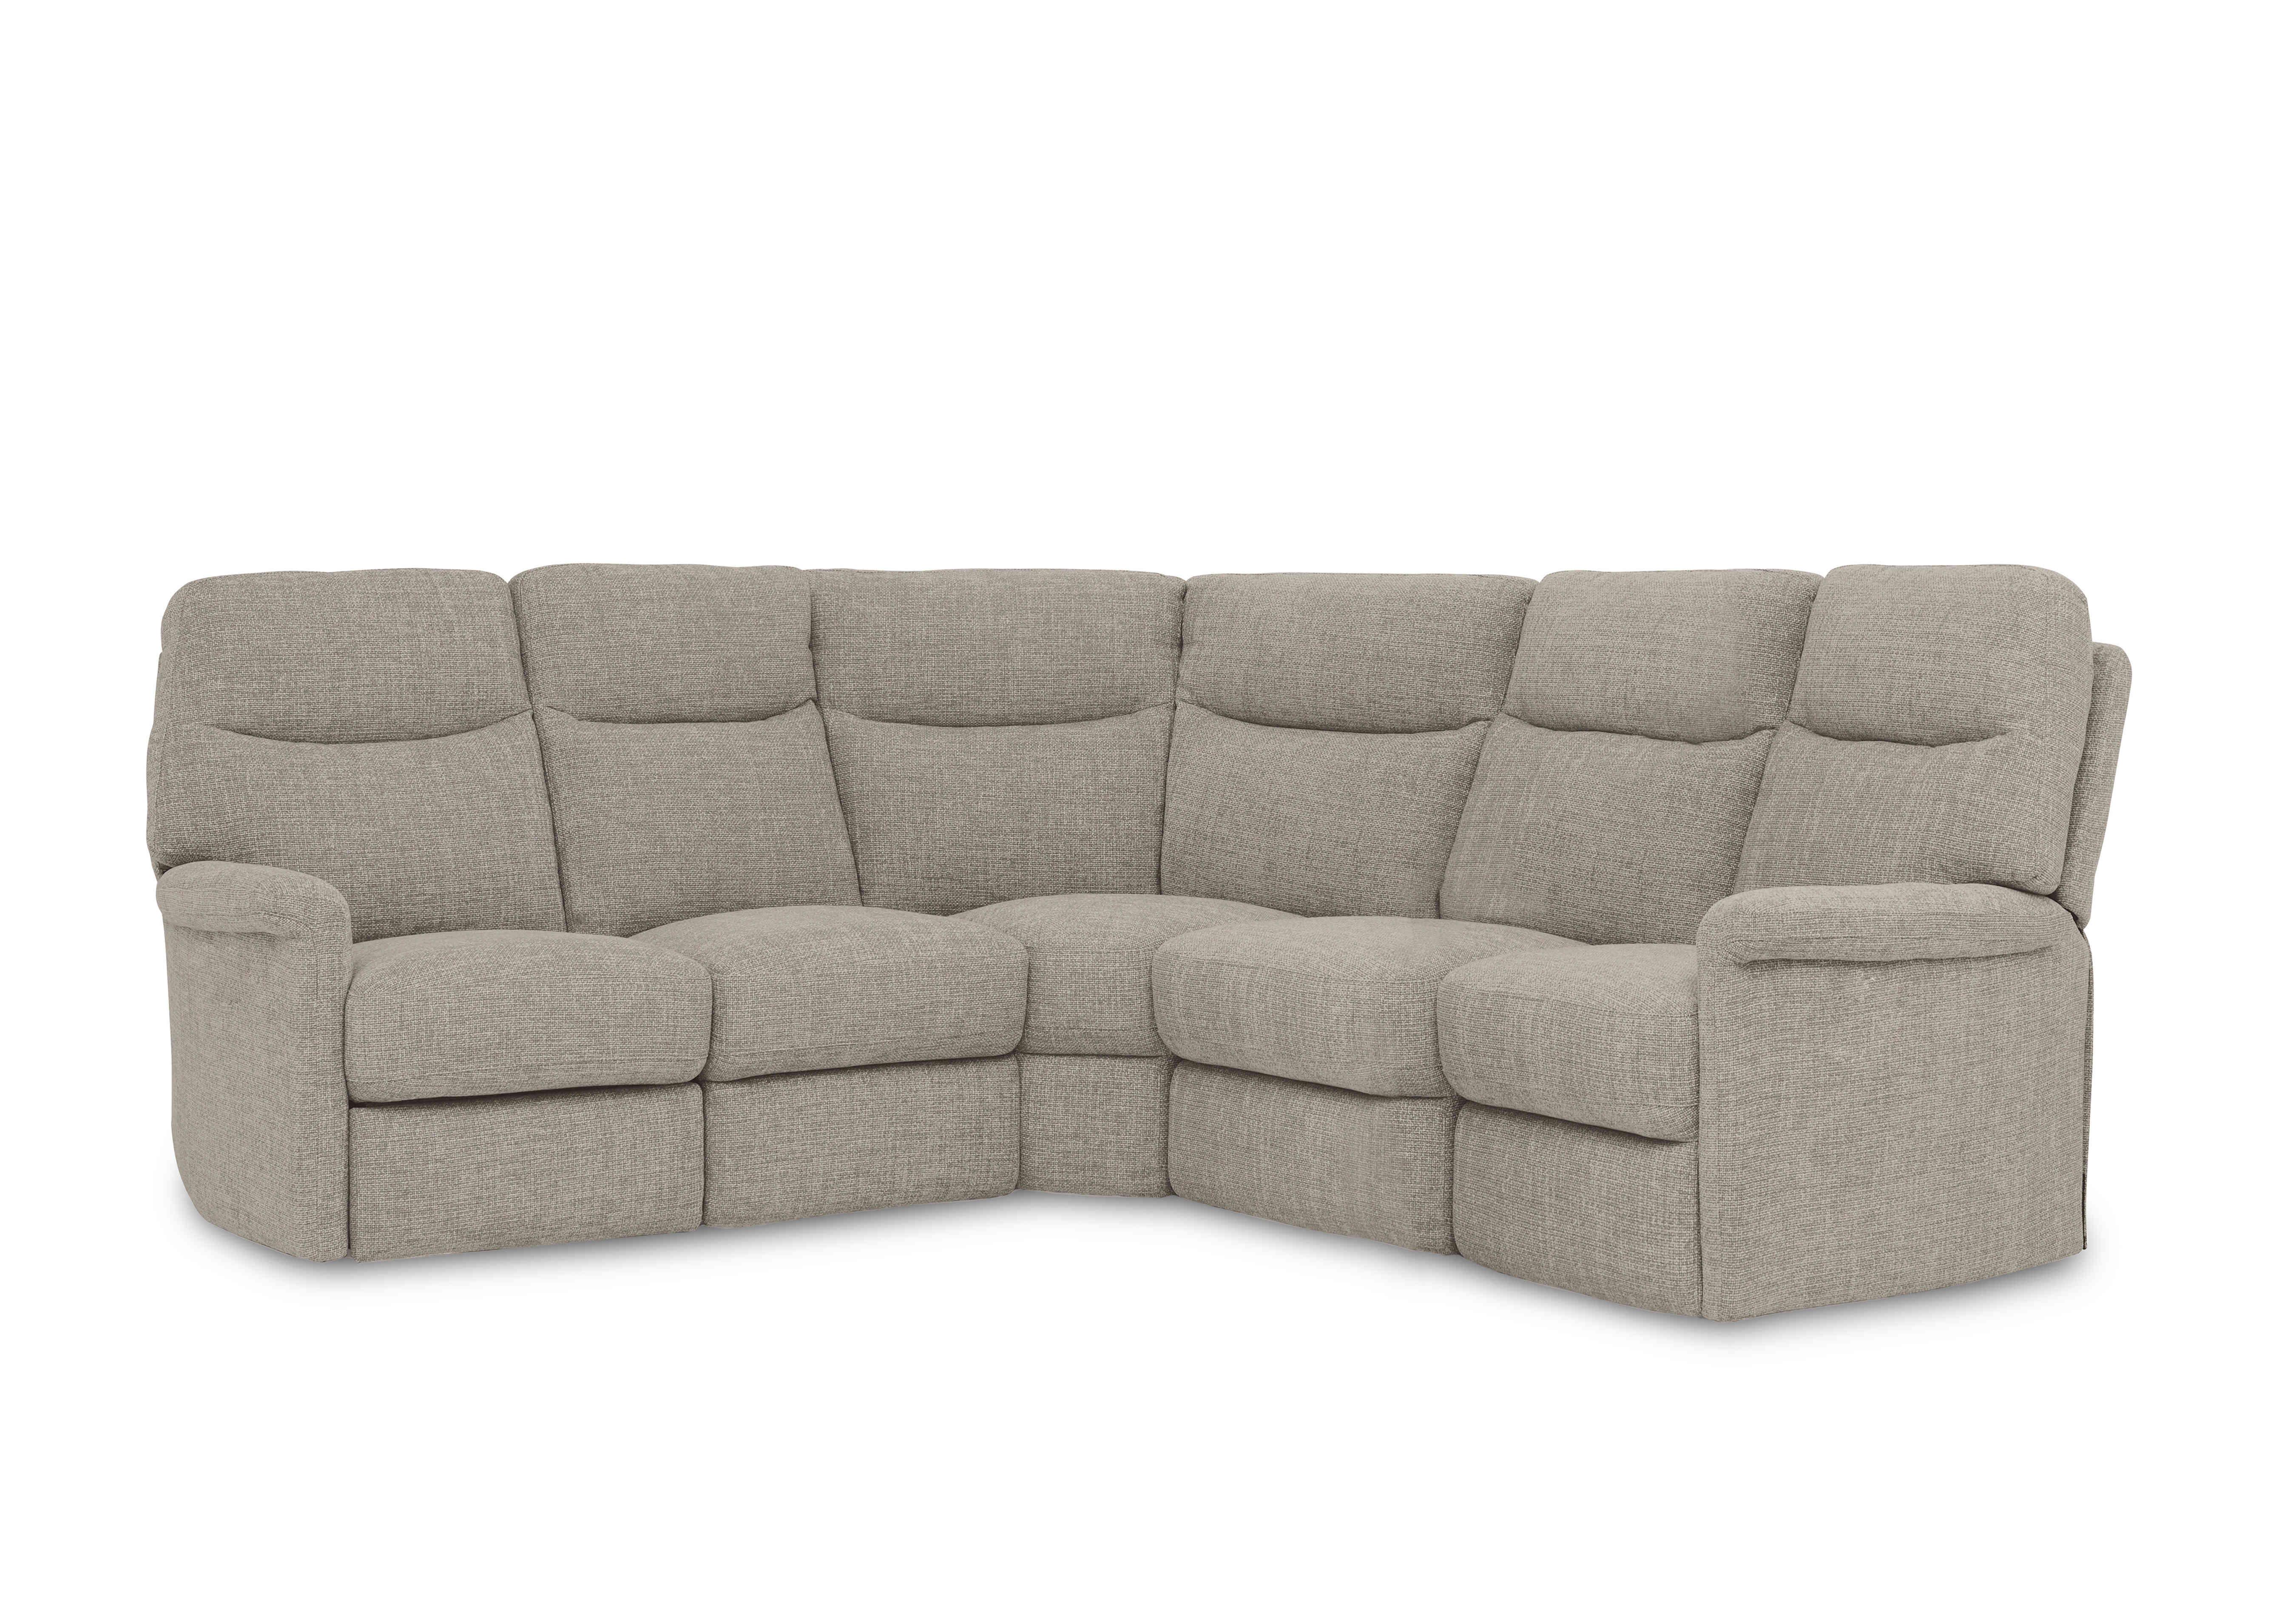 Compact Collection Lille Large Fabric Corner Sofa in Fab-Cac-R120 Sand on Furniture Village